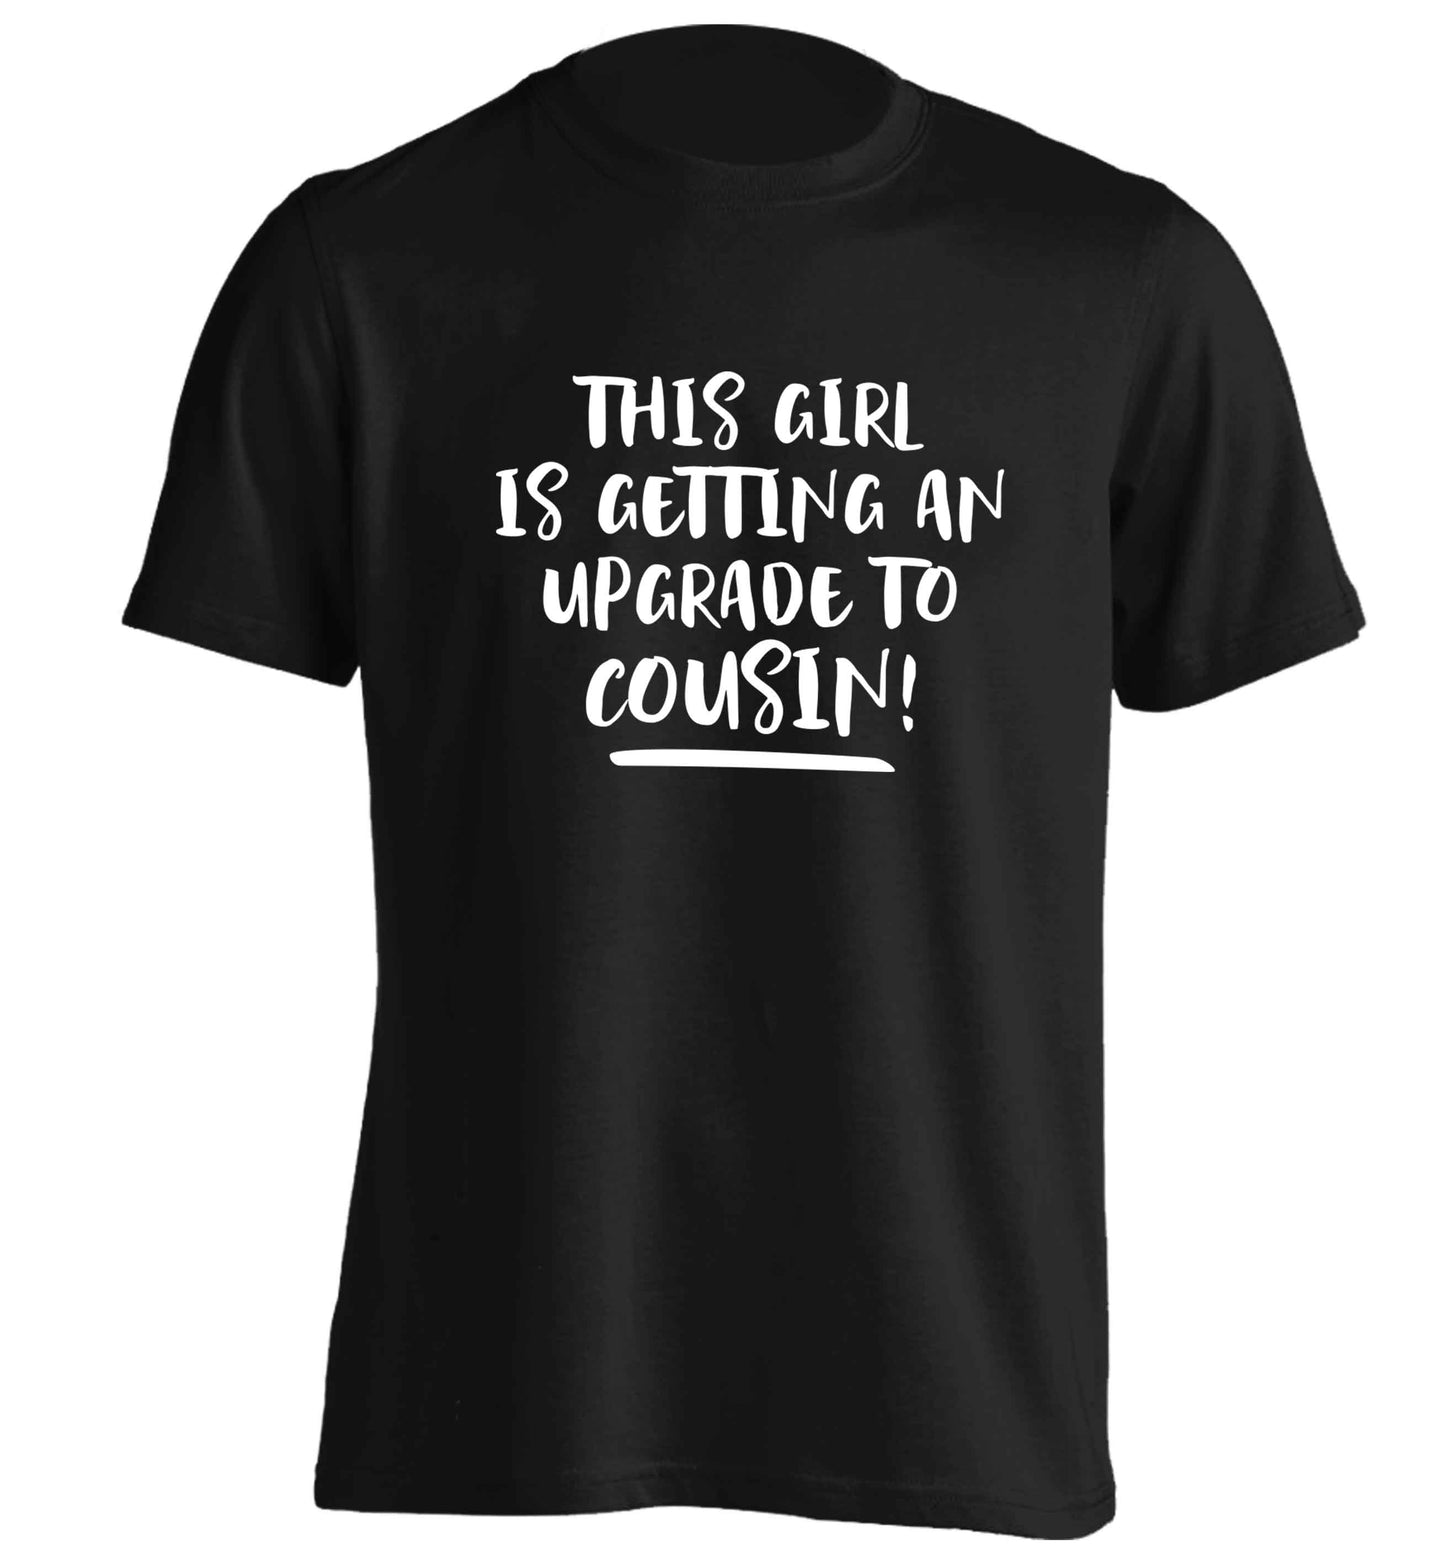 This girl is getting an upgrade to cousin! adults unisex black Tshirt 2XL